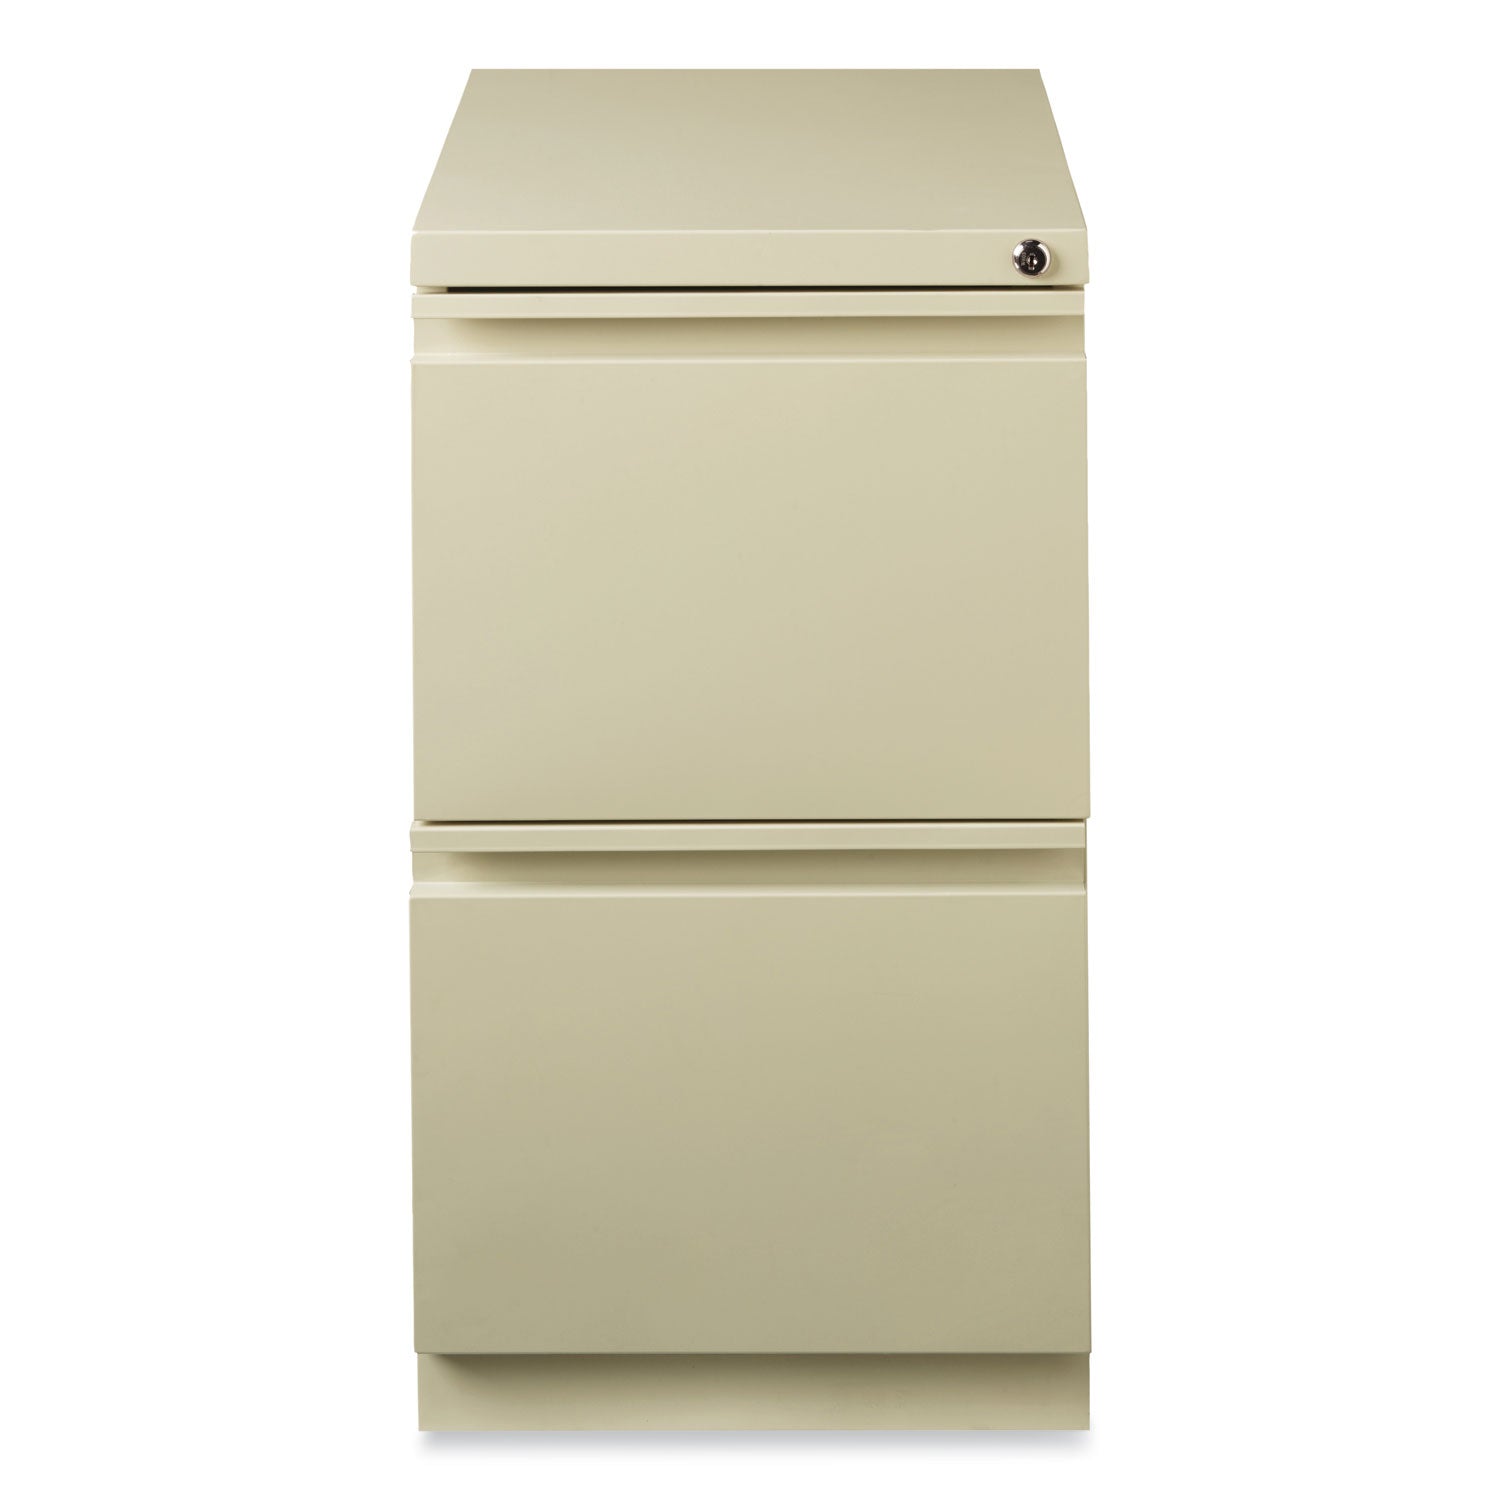 full-width-pull-20-deep-mobile-pedestal-file-2-drawer-file-file-letter-putty-15x1988x2775-ships-in-4-6-business-days_hid18577 - 2